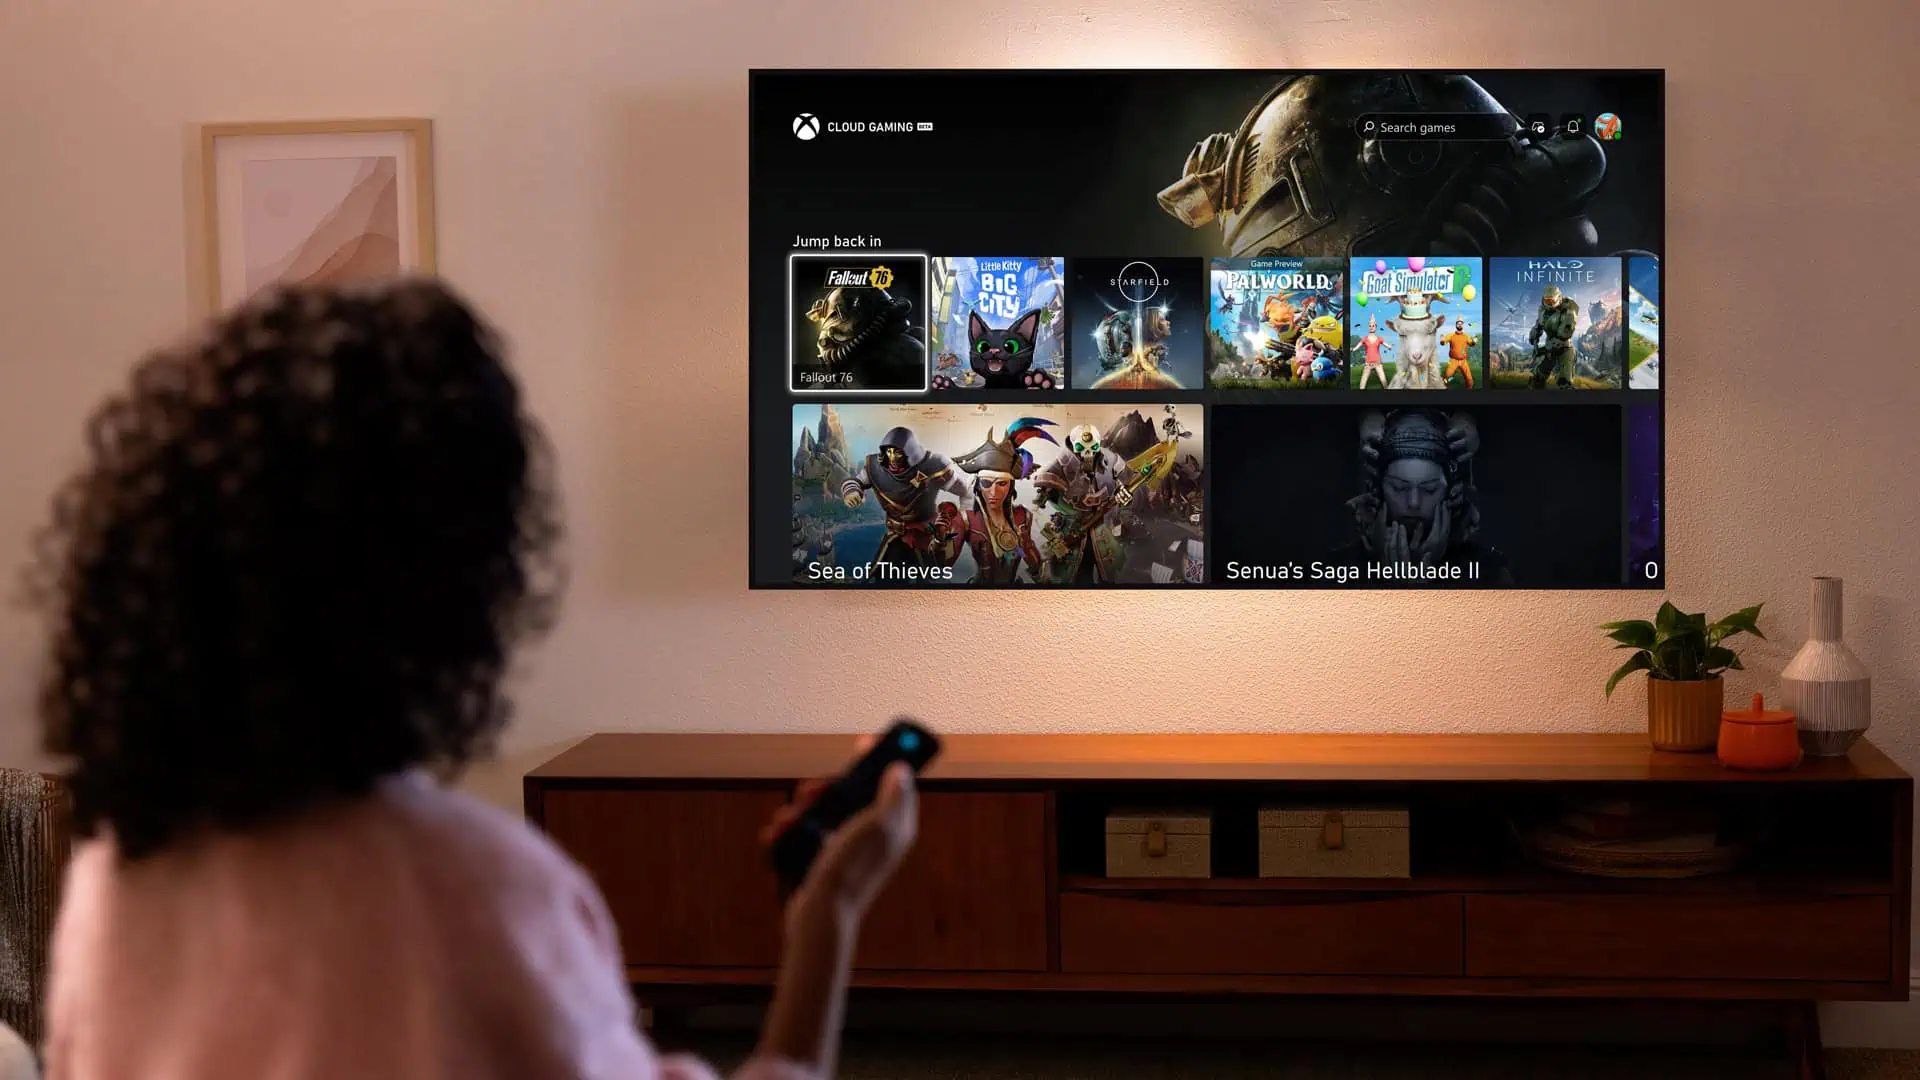 Xbox Cloud Gaming on Fire TV